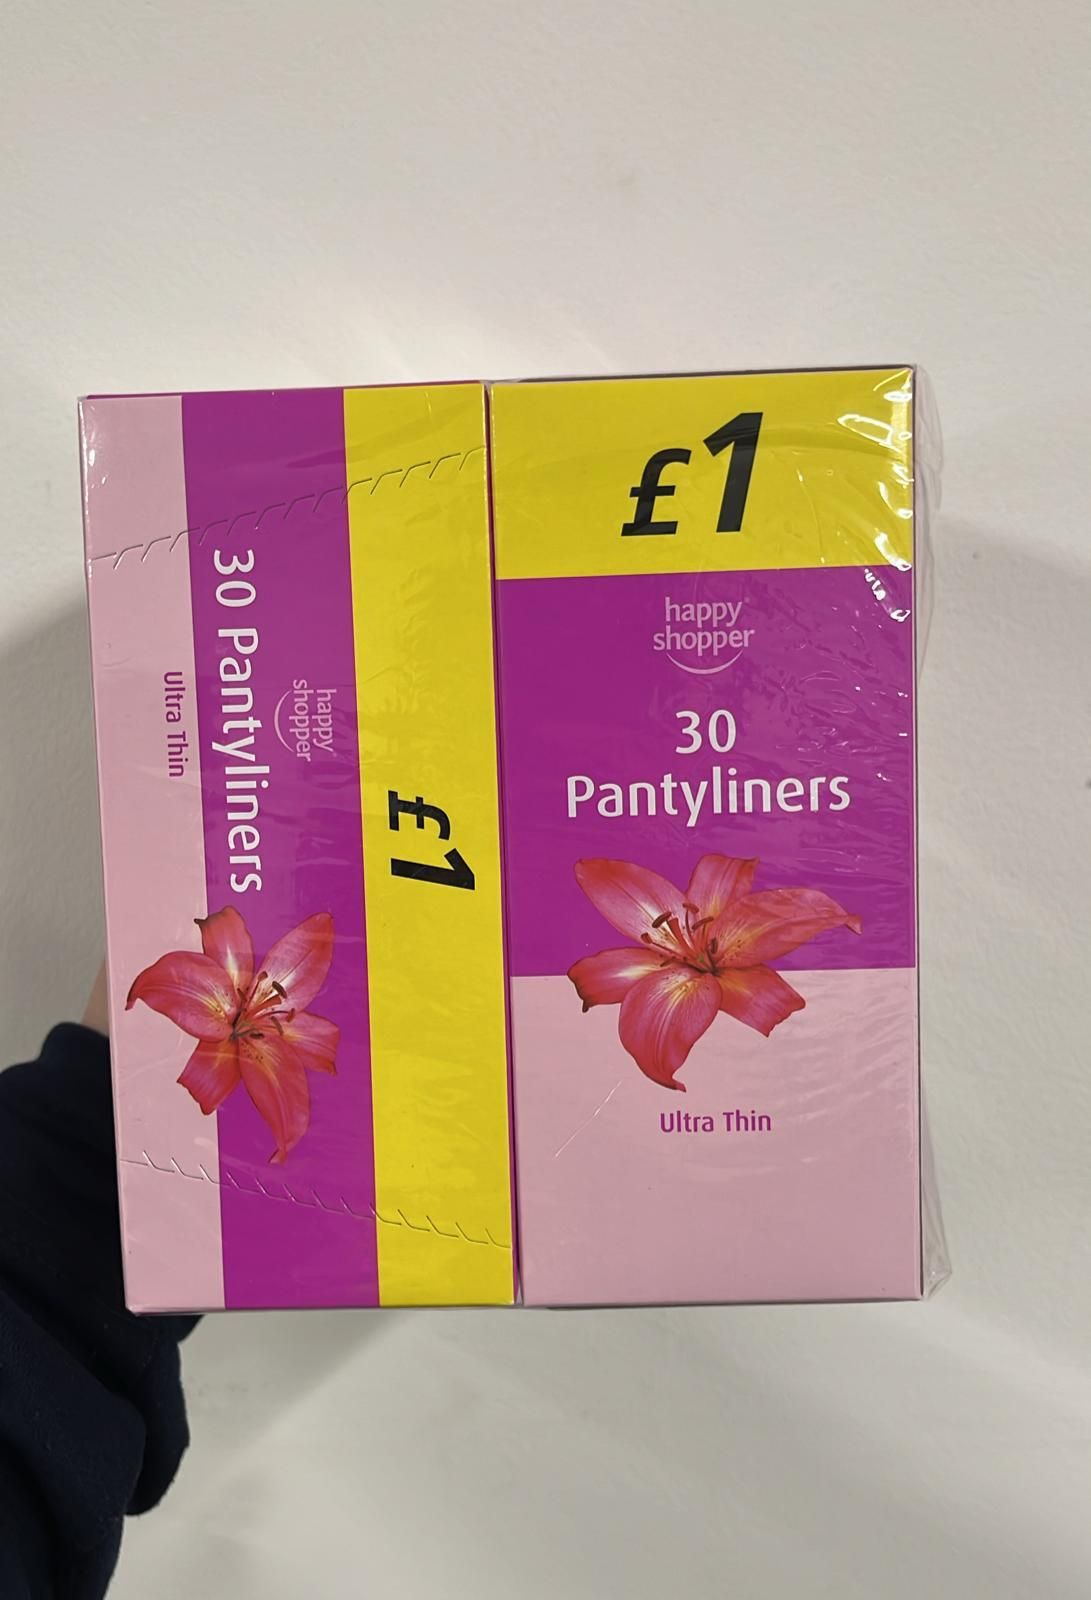 Happy shopper Panty liners ultra thin price marked £1 30pk 